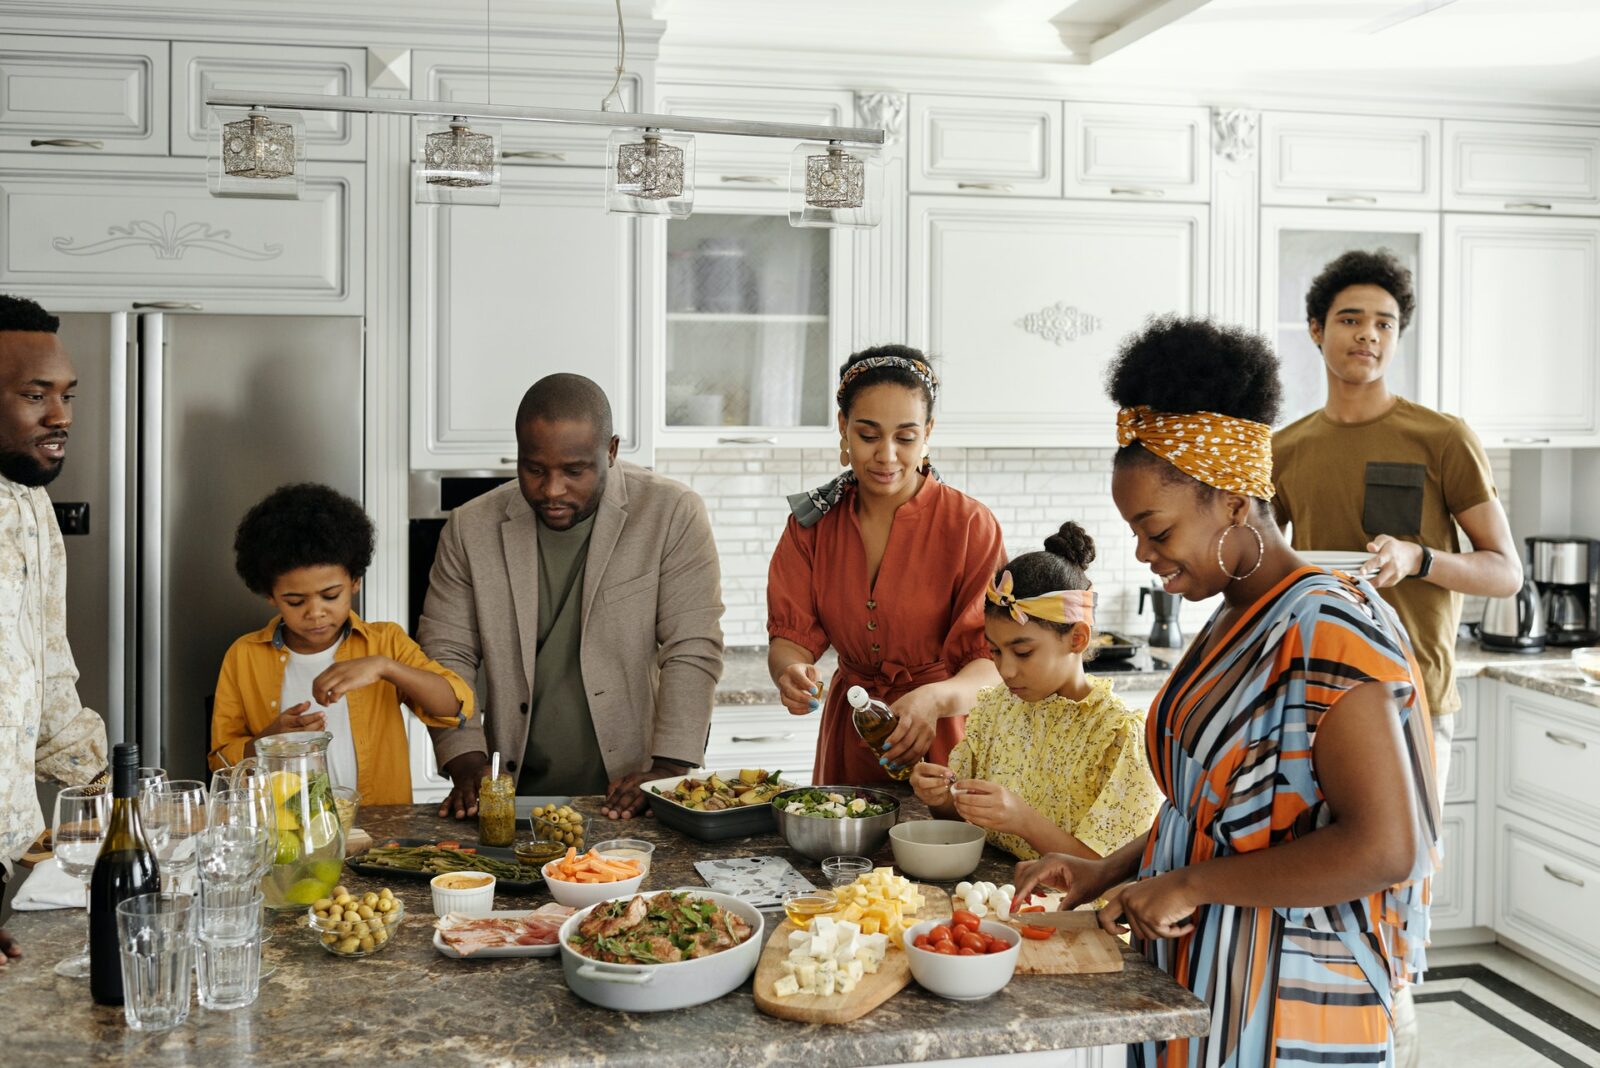 a family of black women, men, and children eating at a table in a kitchen